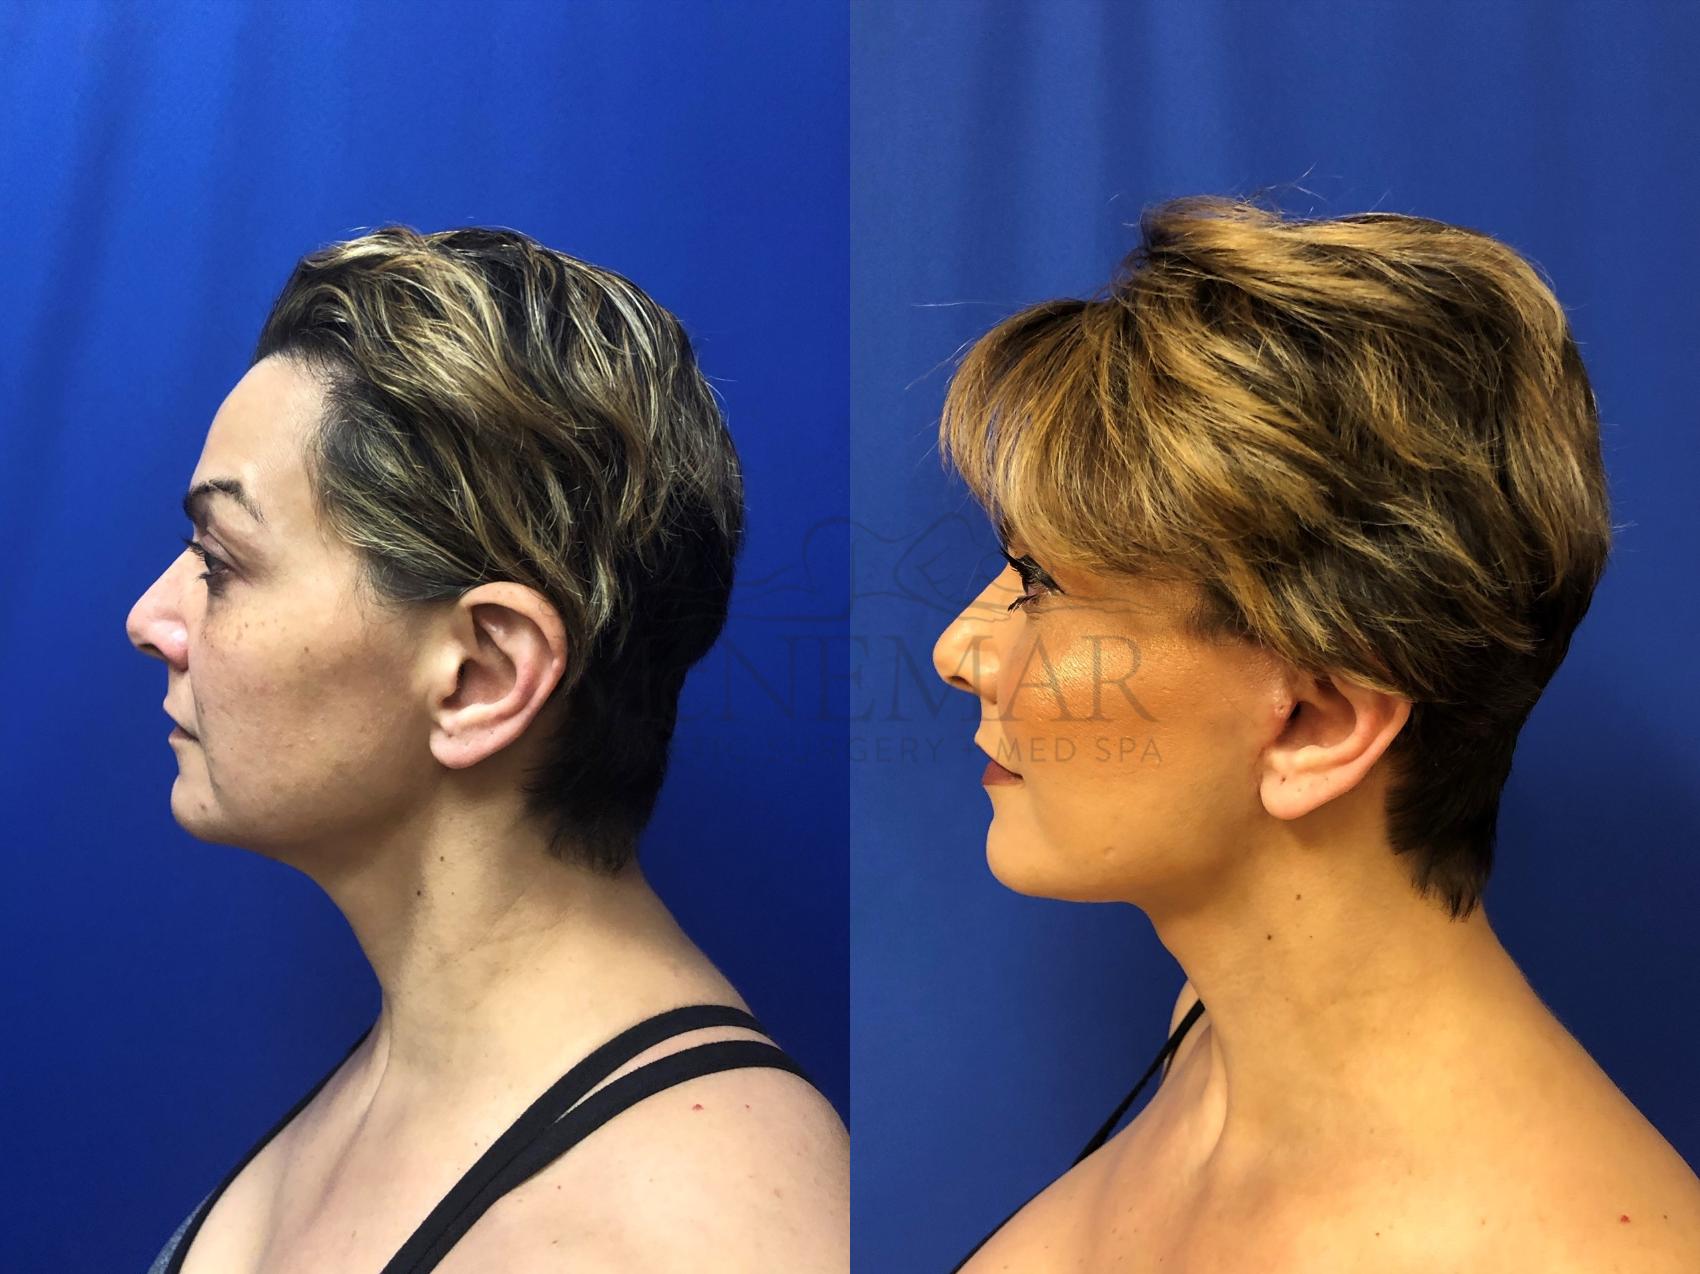 Facelift for a 50 year old female patient.